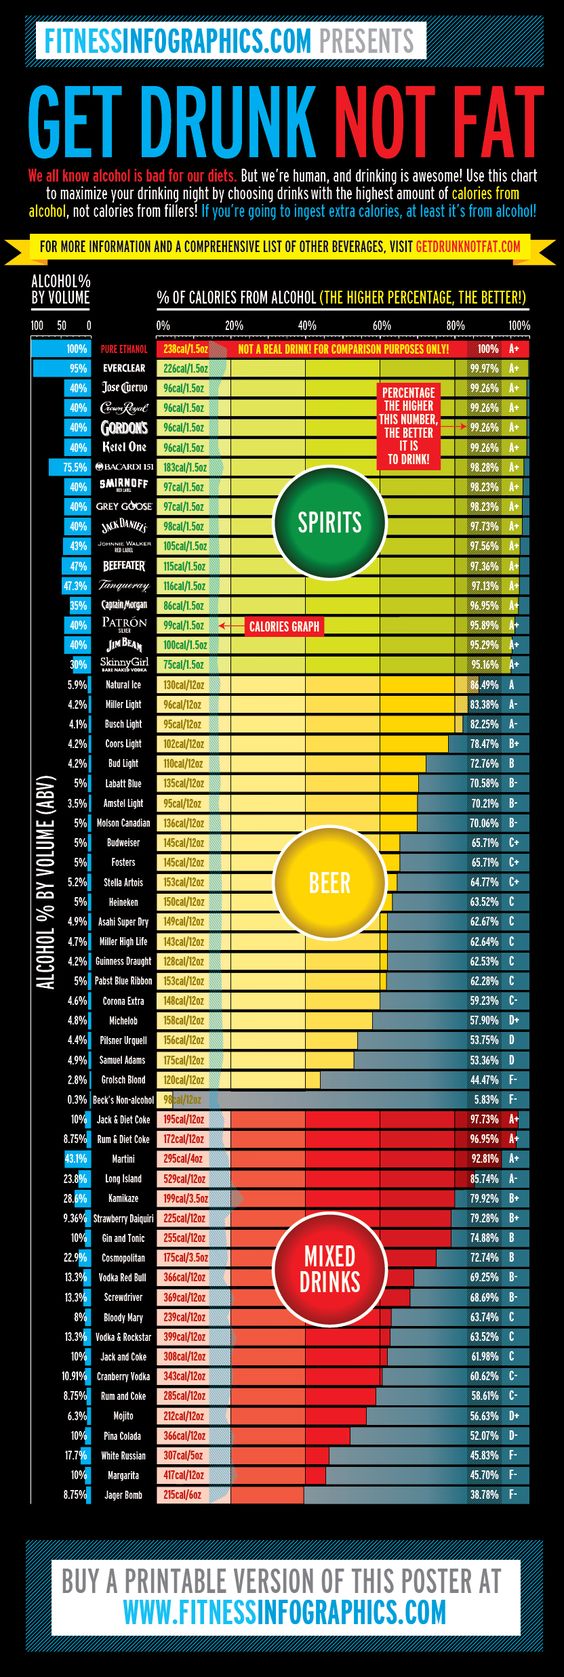 Get drunk, not fat! Use this chart to maximize your drinking by choosing drinks with the highest amount of calories from alcohol, not calories from fillers! The better the alcohol-to-calorie ratio, the less drinks you’ll need to have a good time. This chart is hard to see on a phone but there's an app you can download called Great Drink Nutrition Facts with all the same info! Jared get this so you can make ppl drinks worried about calories.